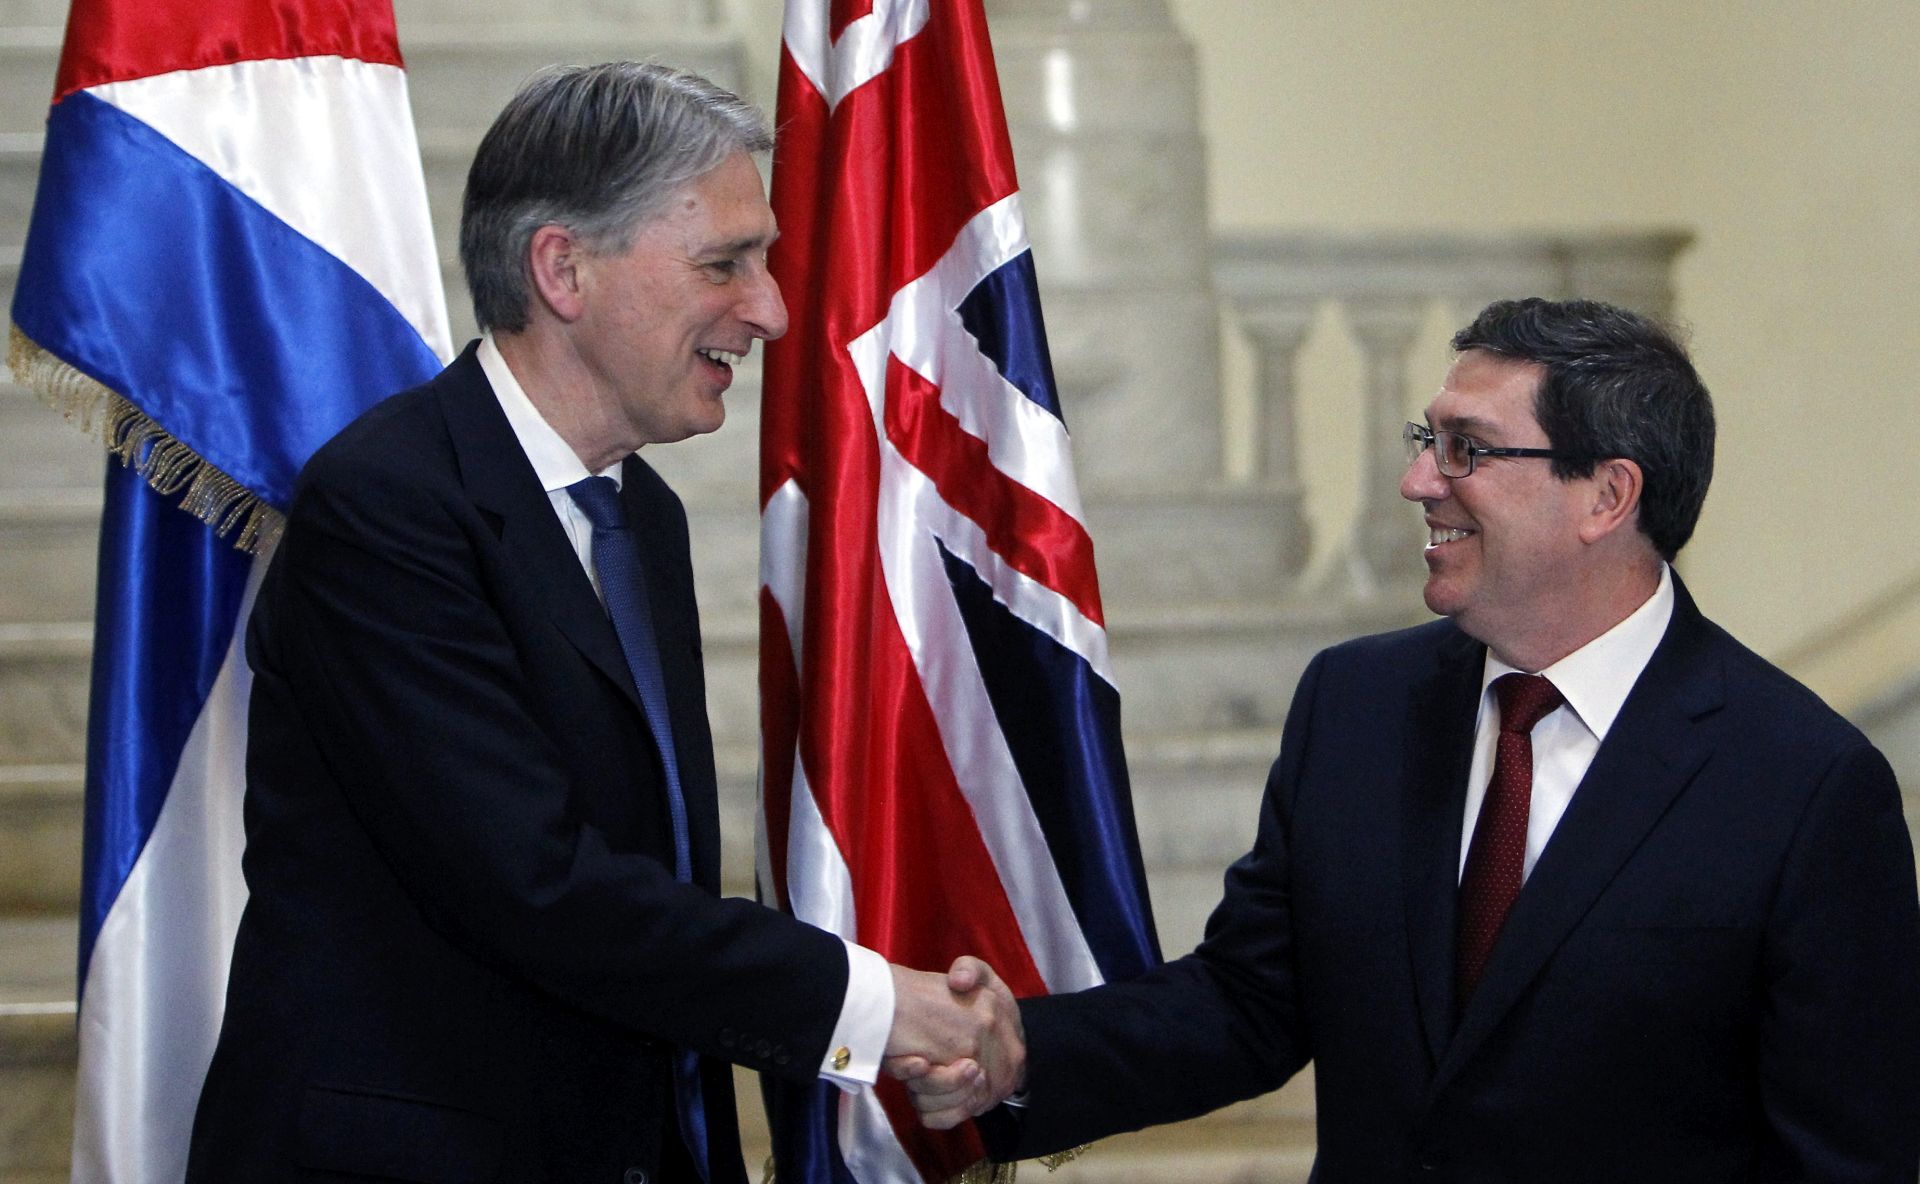 epa05282026 British Secretary of State for Foreign and Commonwealth Affairs, Philip Hammond (L) shakes hands with his Cuban counterpart Bruno Rodriguez Parrilla (R) at the Foreign Ministry headquarters in Havana, Cuba, 28 April 2016. Hammond is in Cuba as part of his Latin American tour, which includes Colombia and Mexico.  EPA/ERNESTO MASTRASCUSA